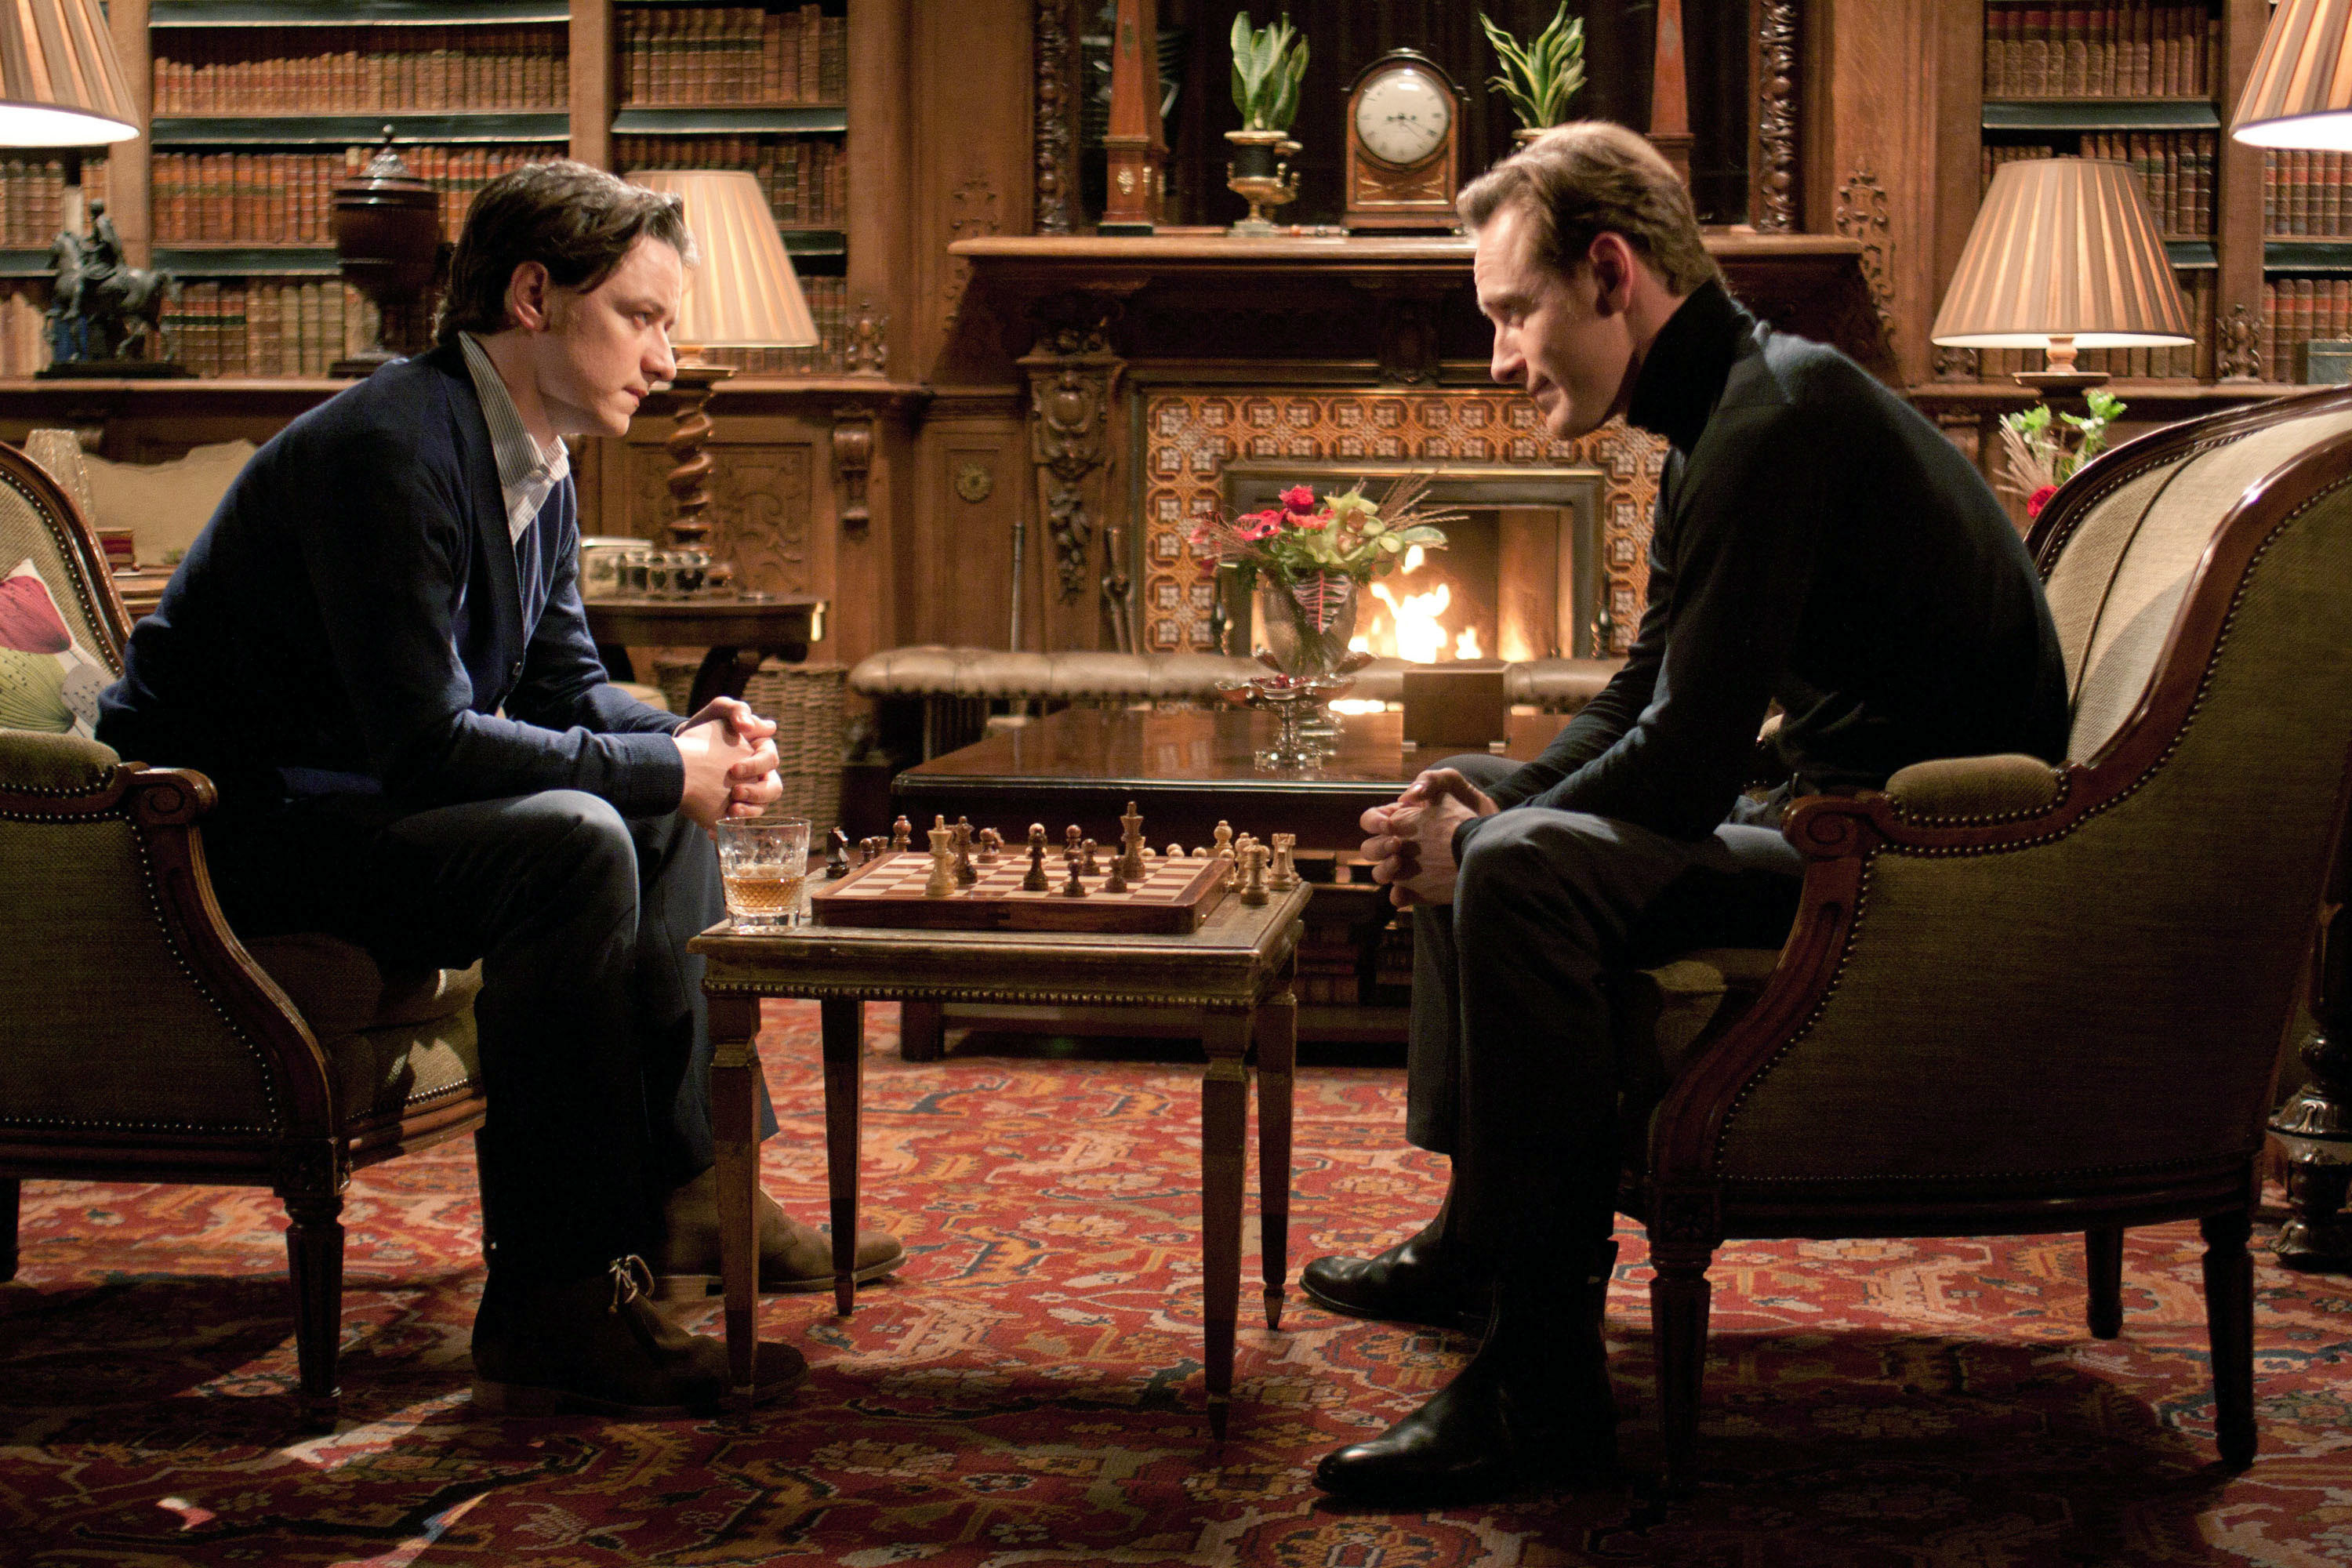 James McAvoy and Michael Fassbender playing chess